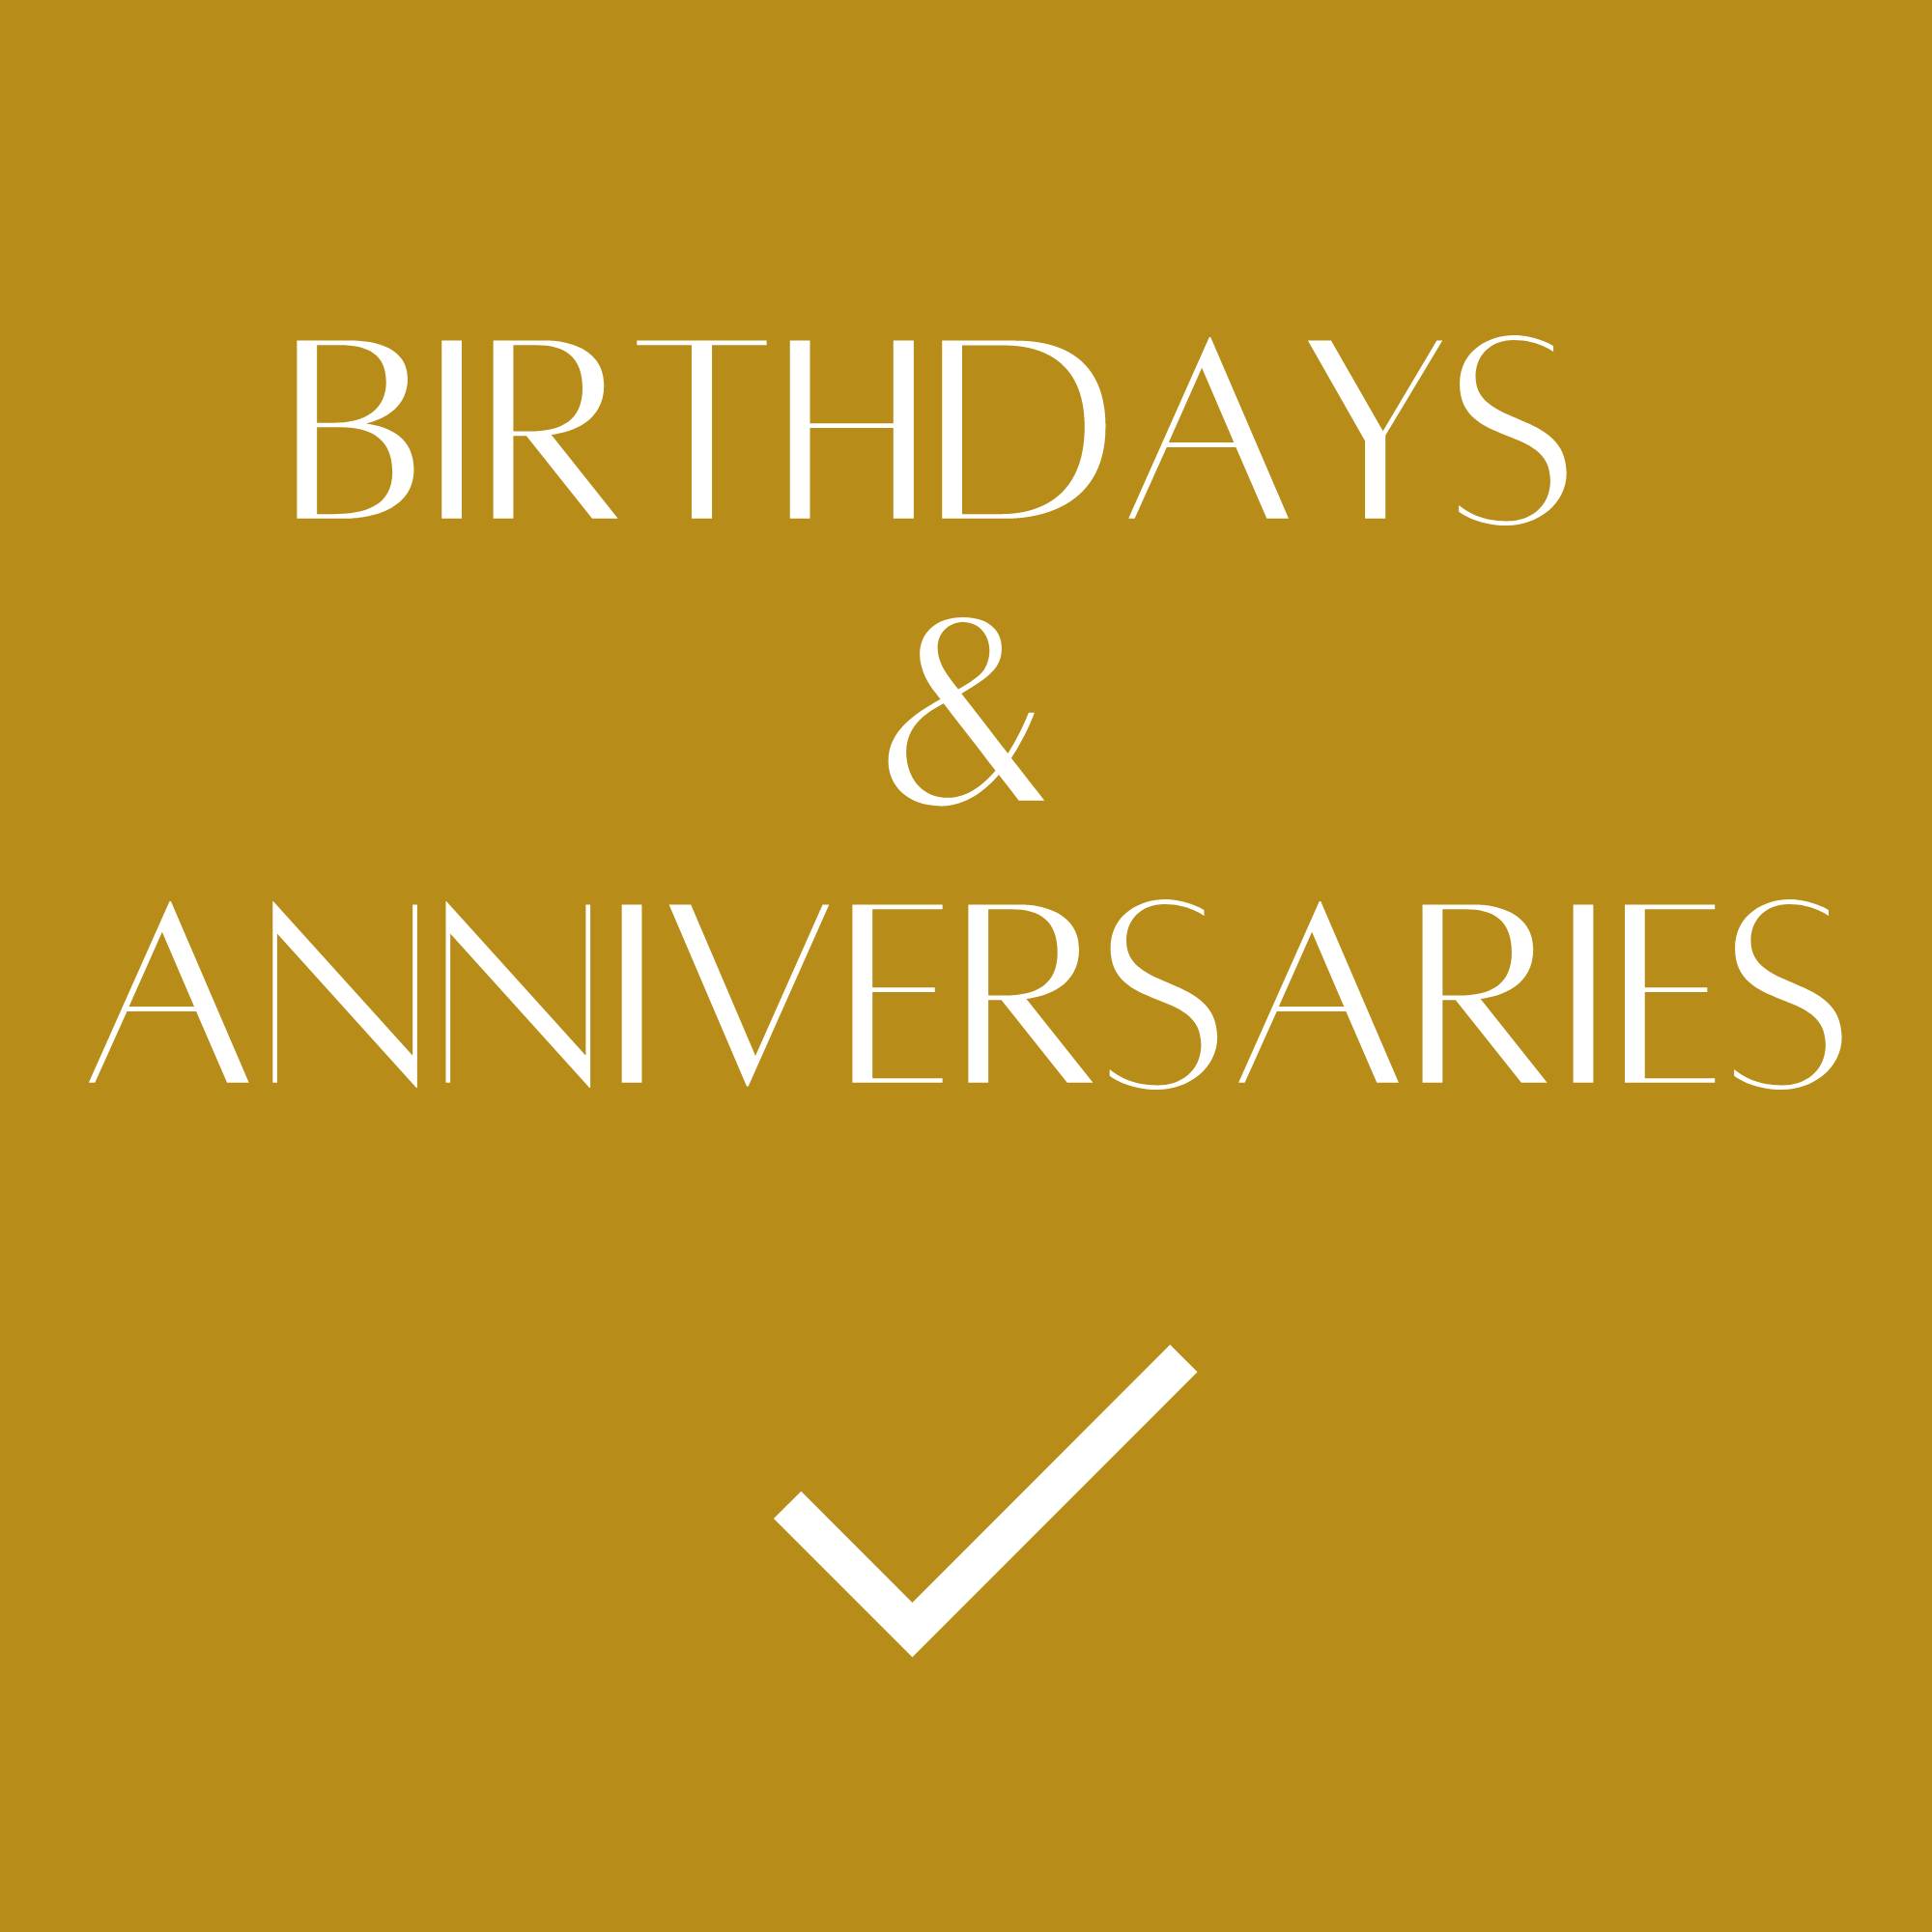 we offer prosecco for birthdays and anniversaries